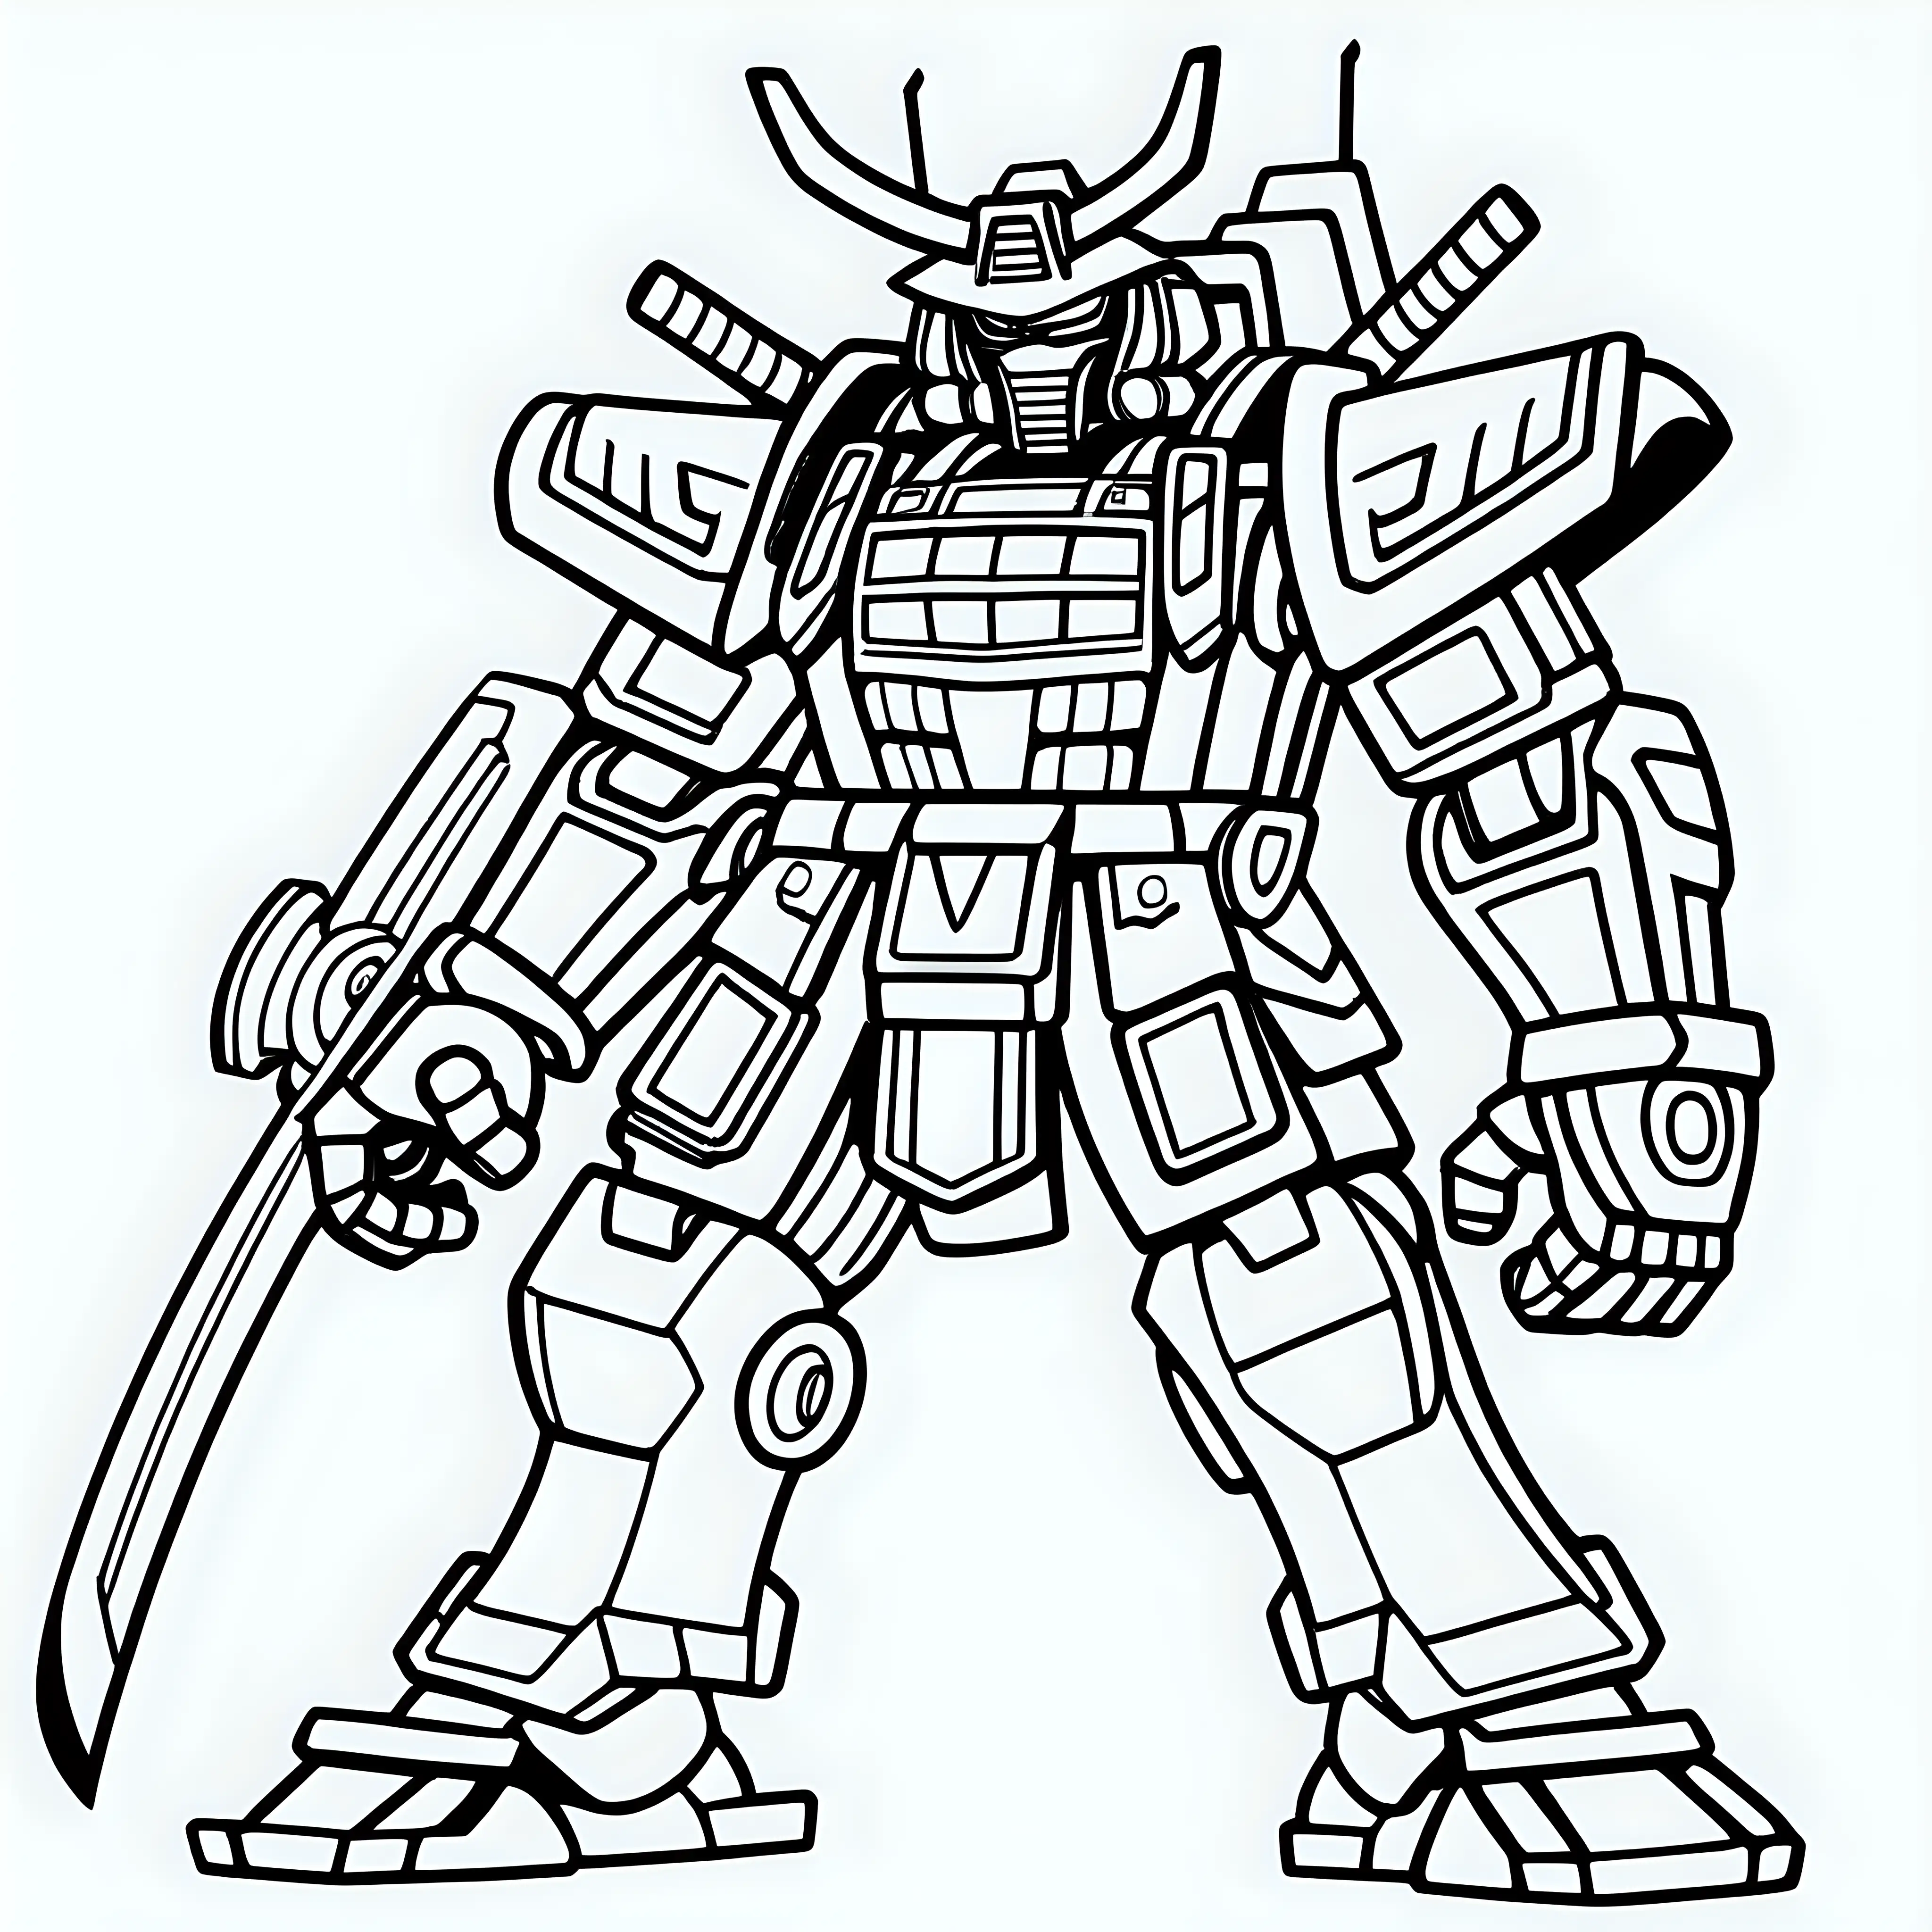 Create a mech samurai cartoon black and white coloring page for kids with thick lines, no shading, low detail.